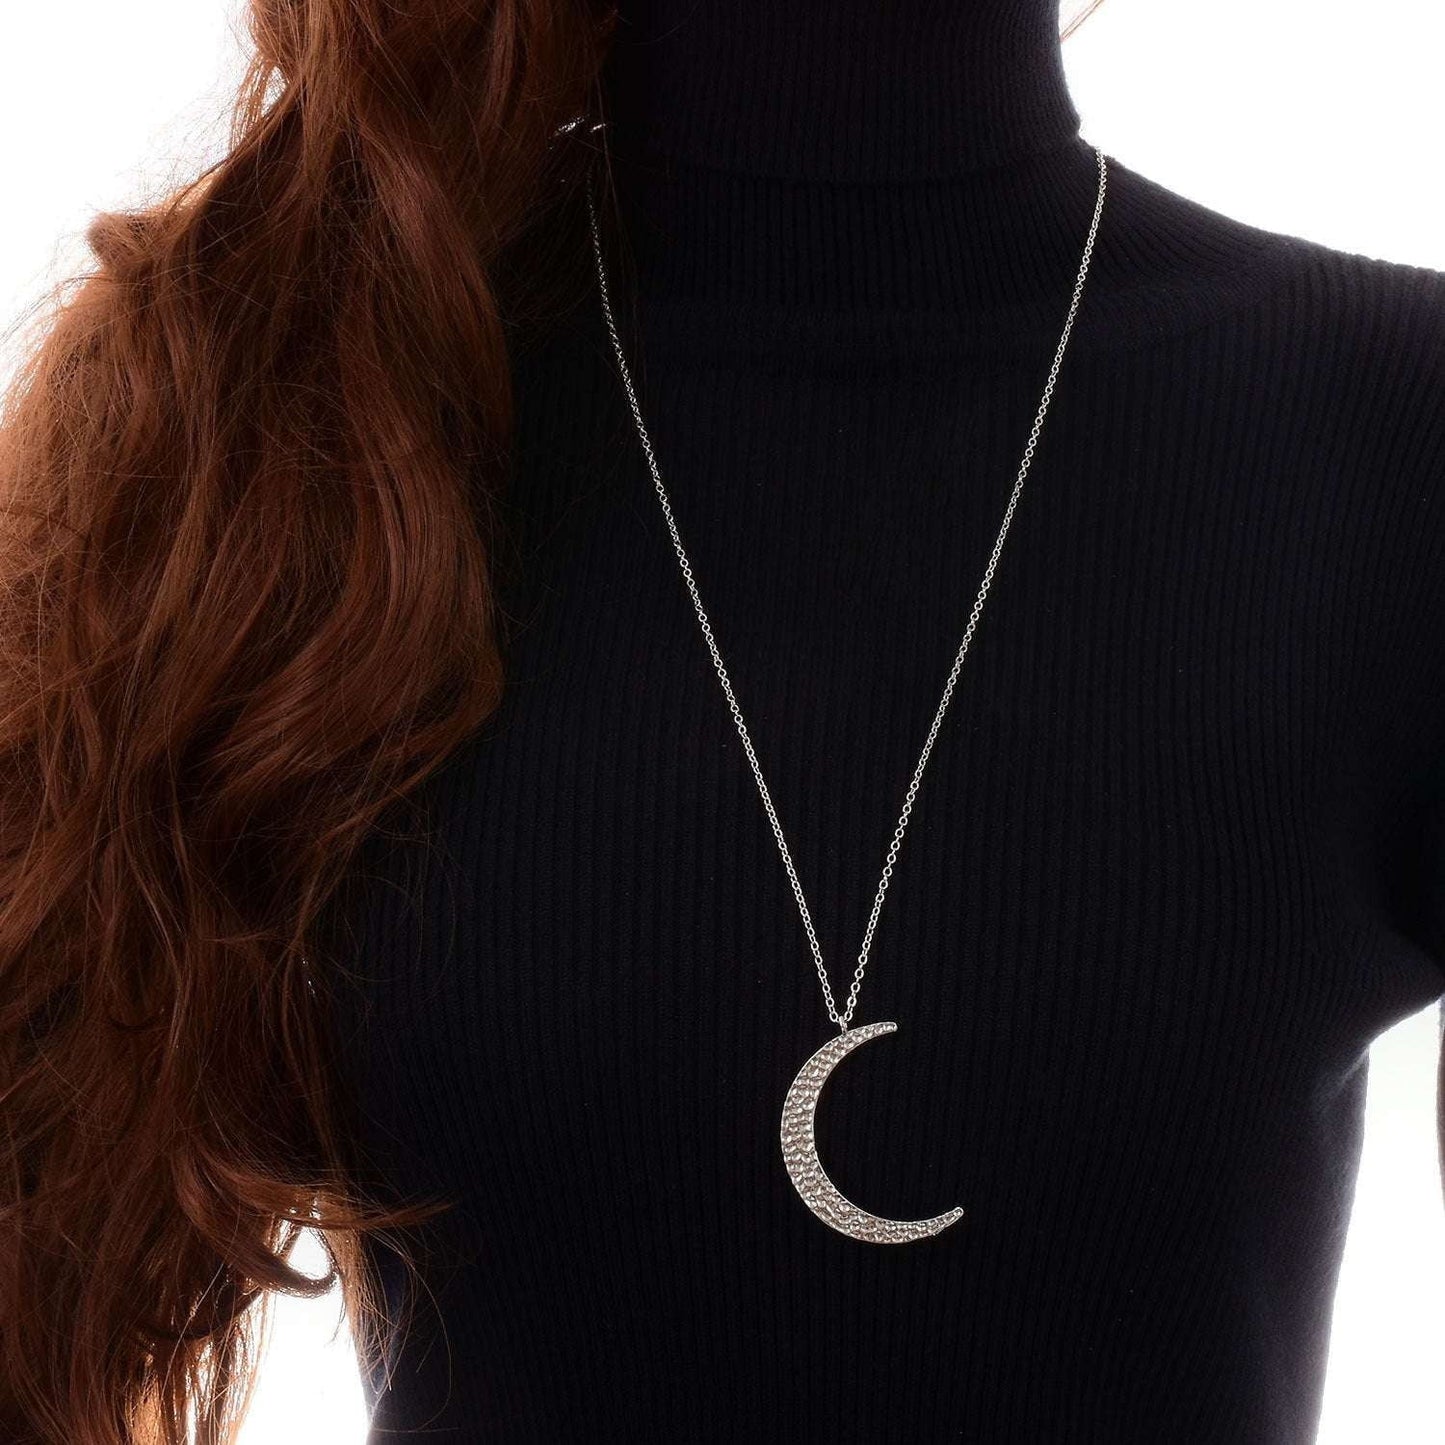 chic single-layer necklace, crescent sweater necklace, trendy pendant jewelry - available at Sparq Mart